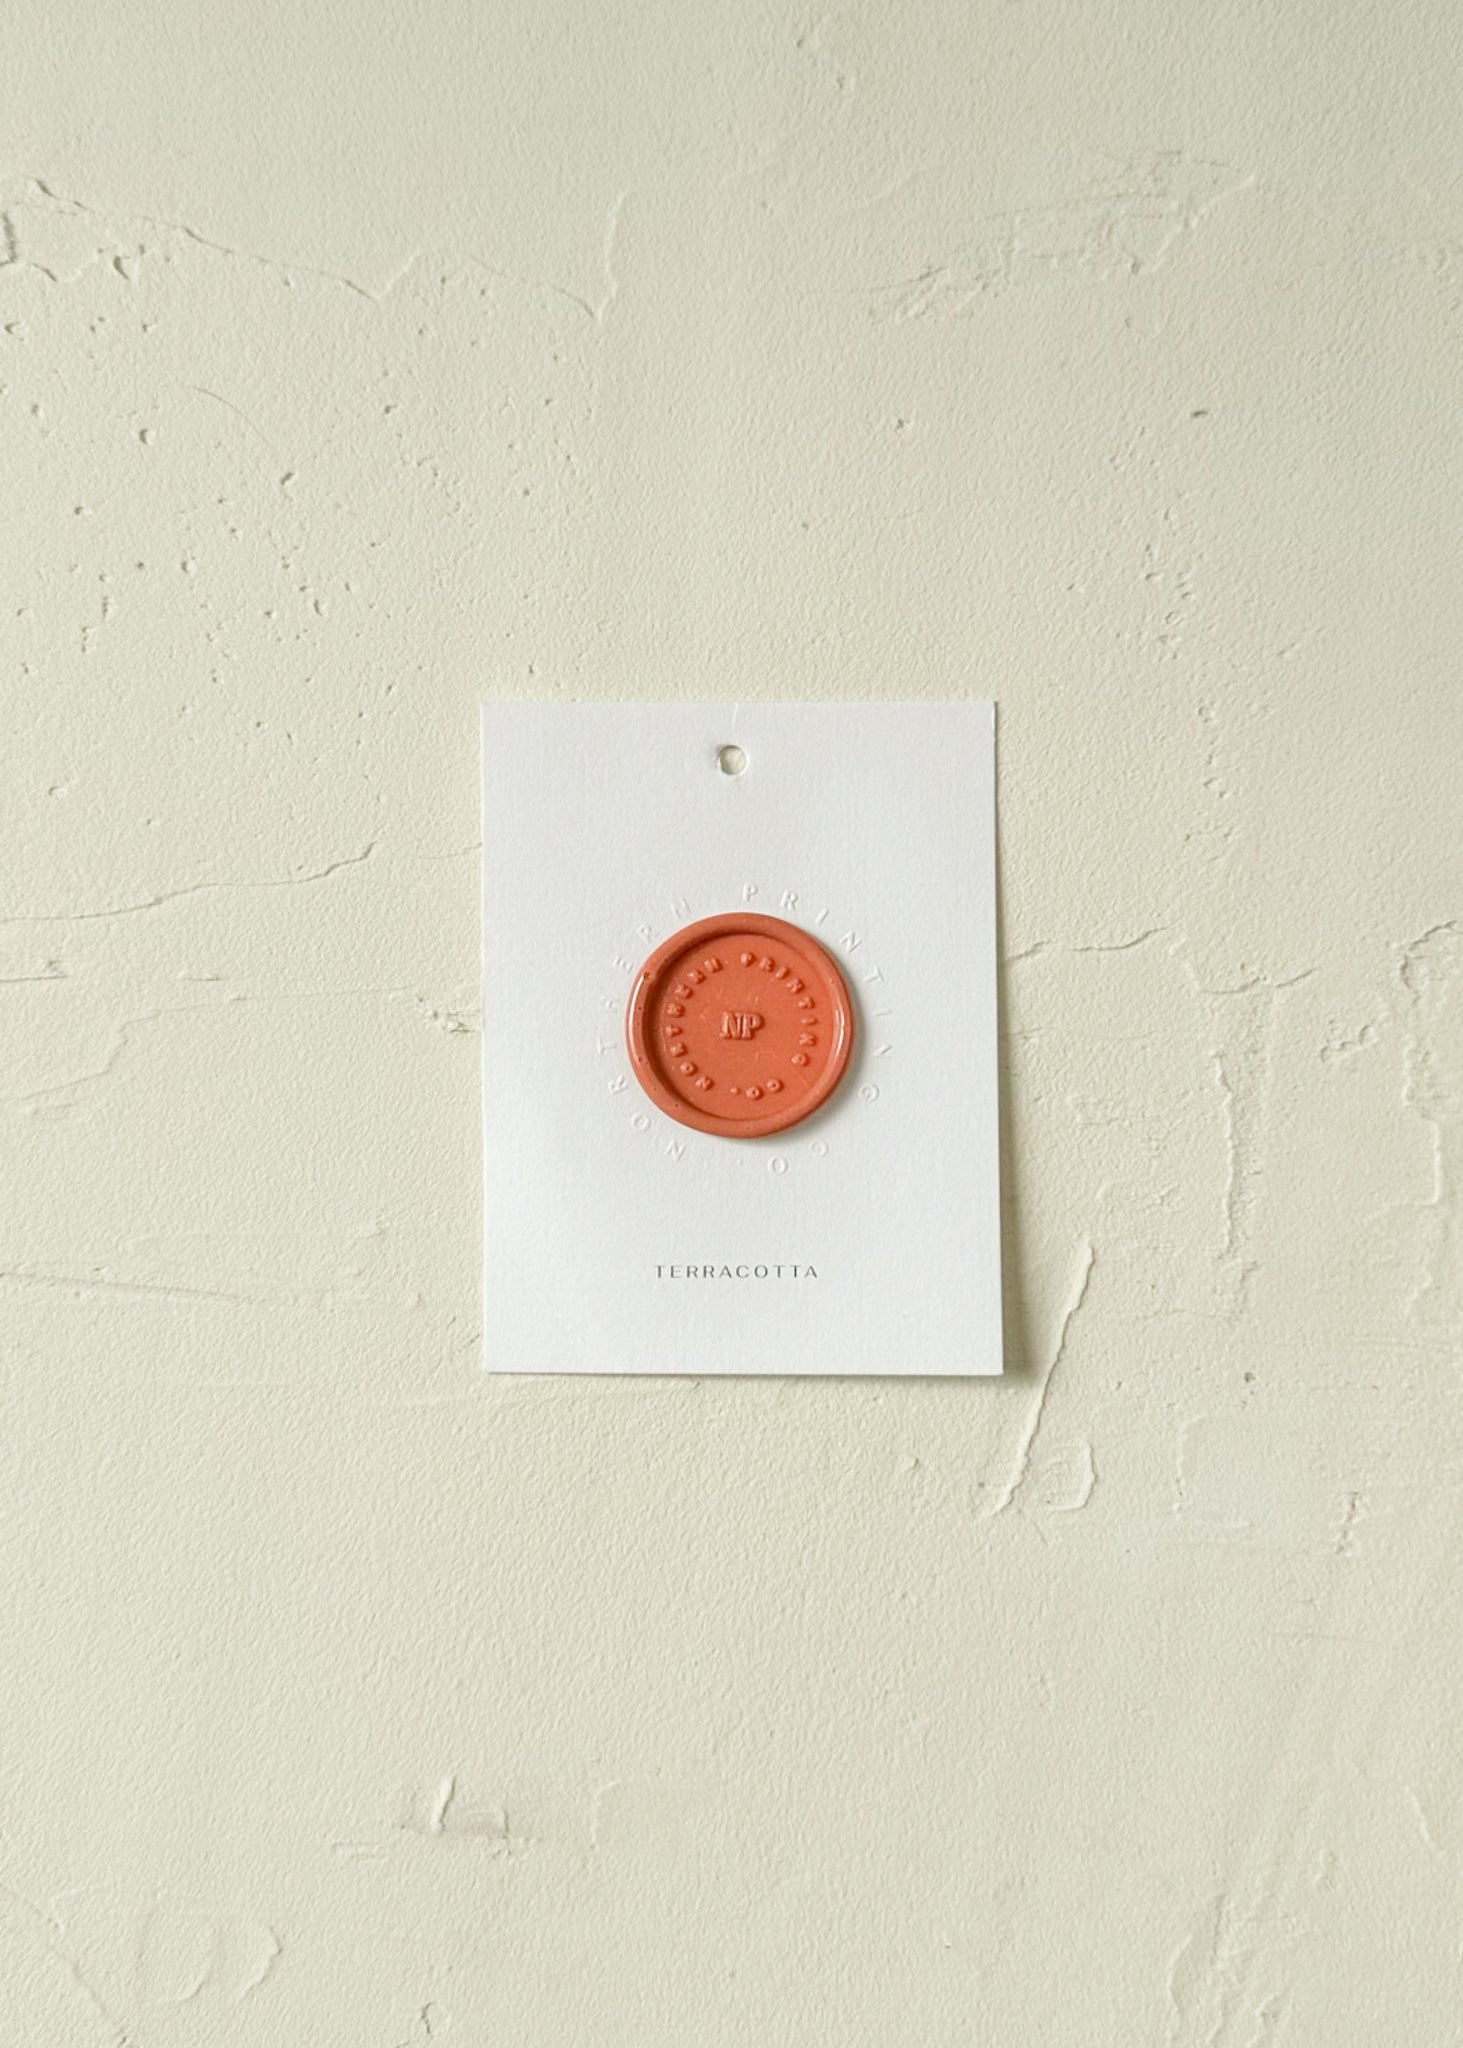 Elevated view of terracotta wax seal stamp sample on textured background